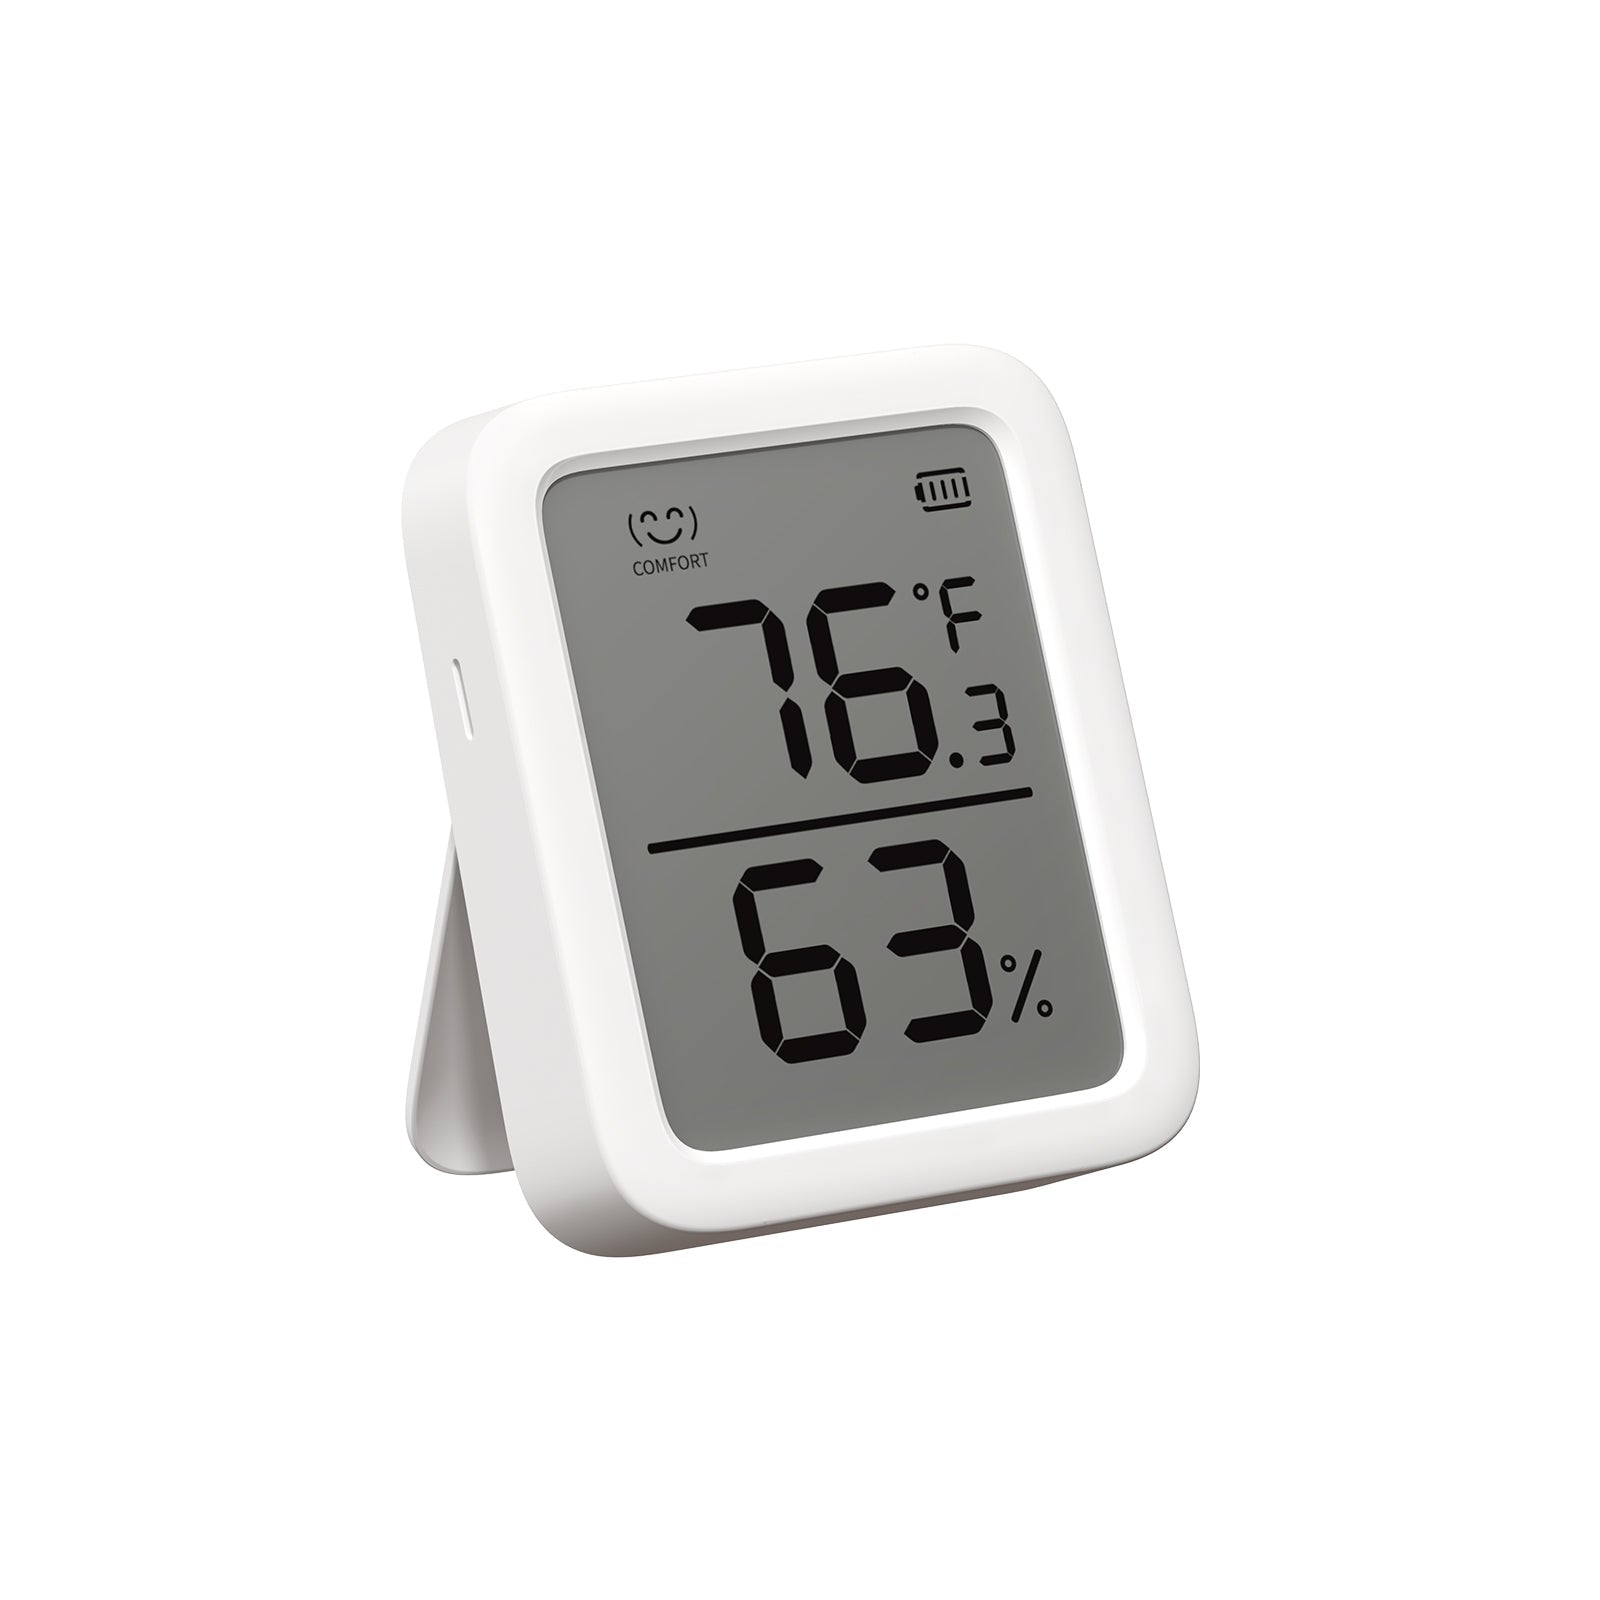 15 in. Indoor/Outdoor Waterproof,with Thermometer and Hygrometer